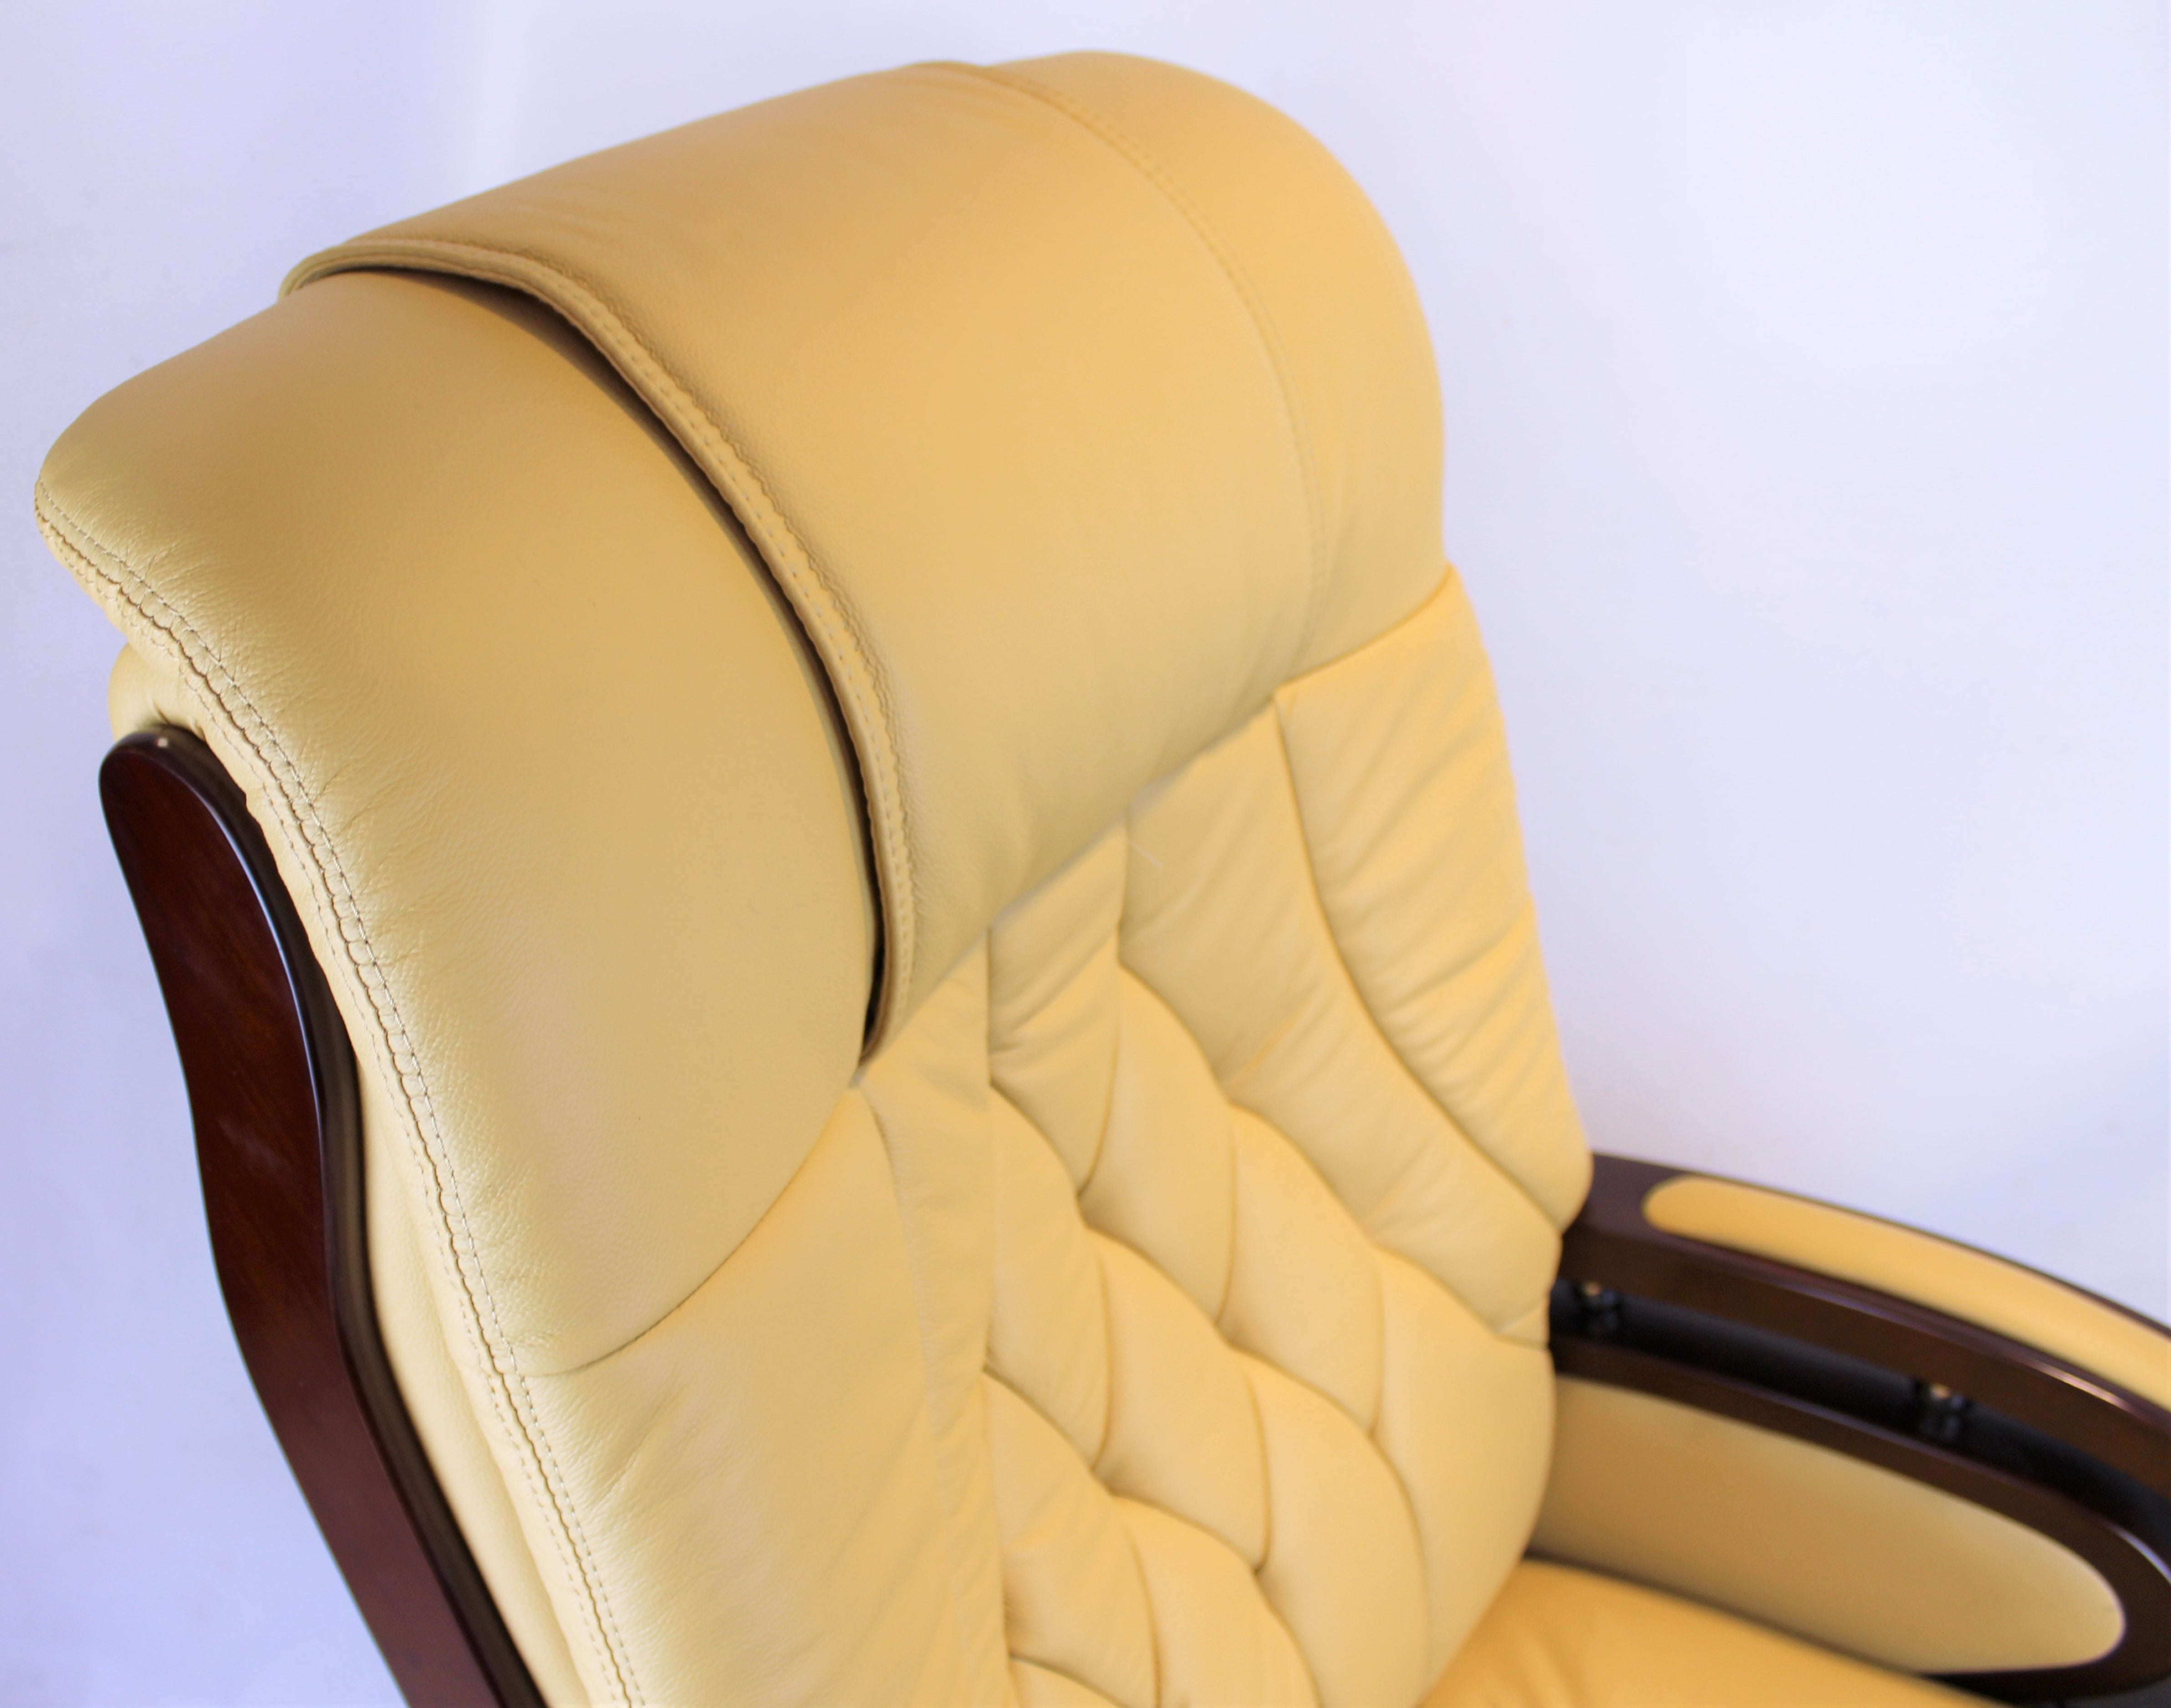 Genuine Leather Beige Executive Office Chair with Wooden Arms - A616